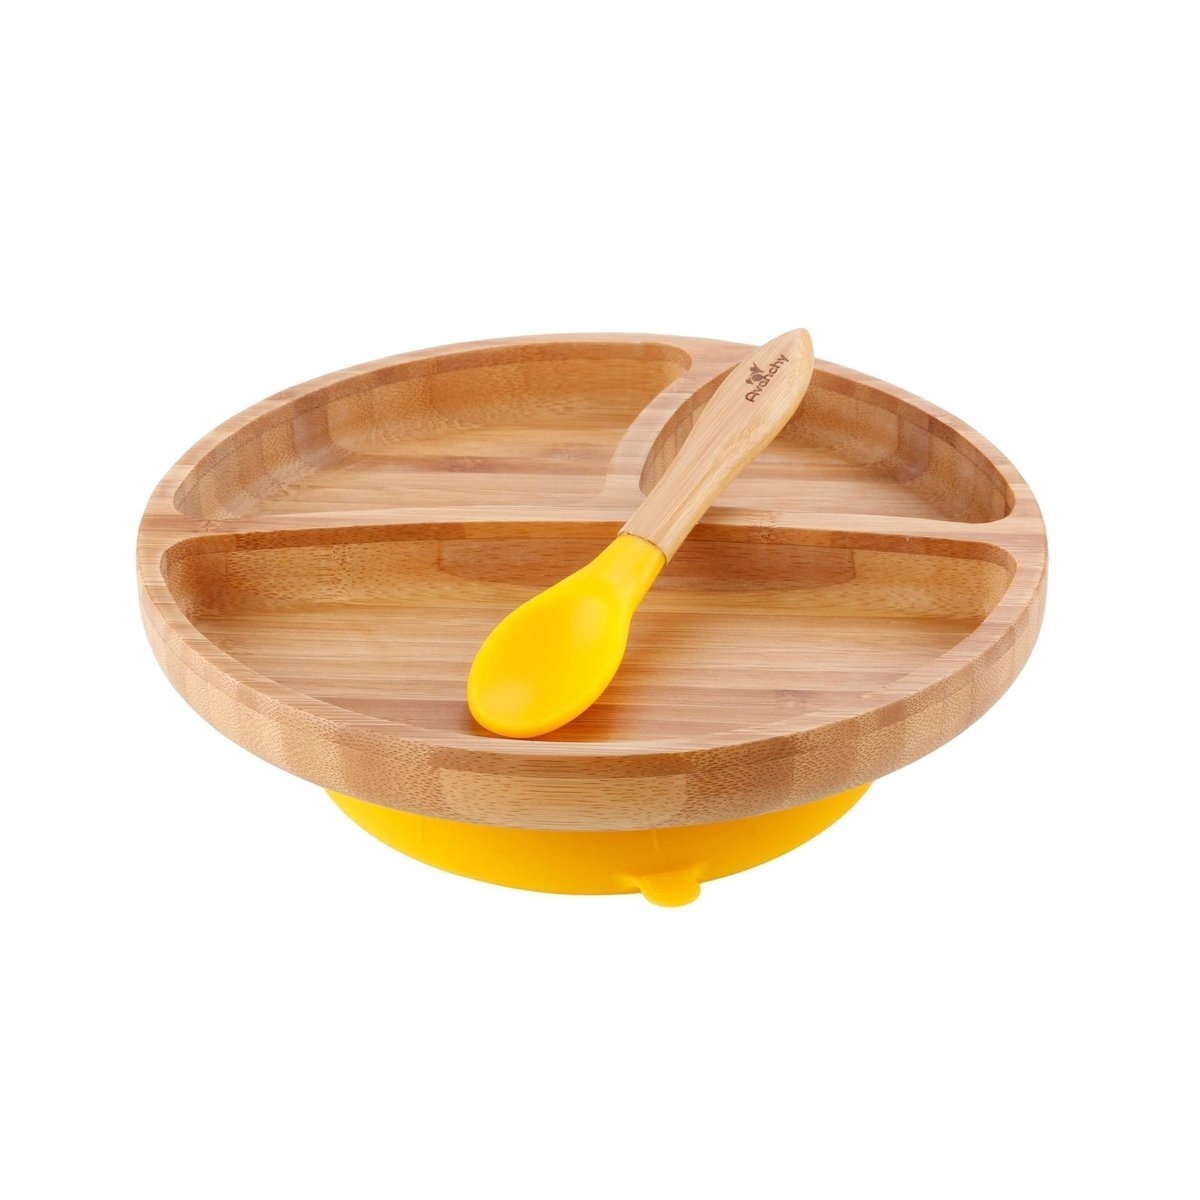 Bamboo Suction Toddler Plate & Spoon